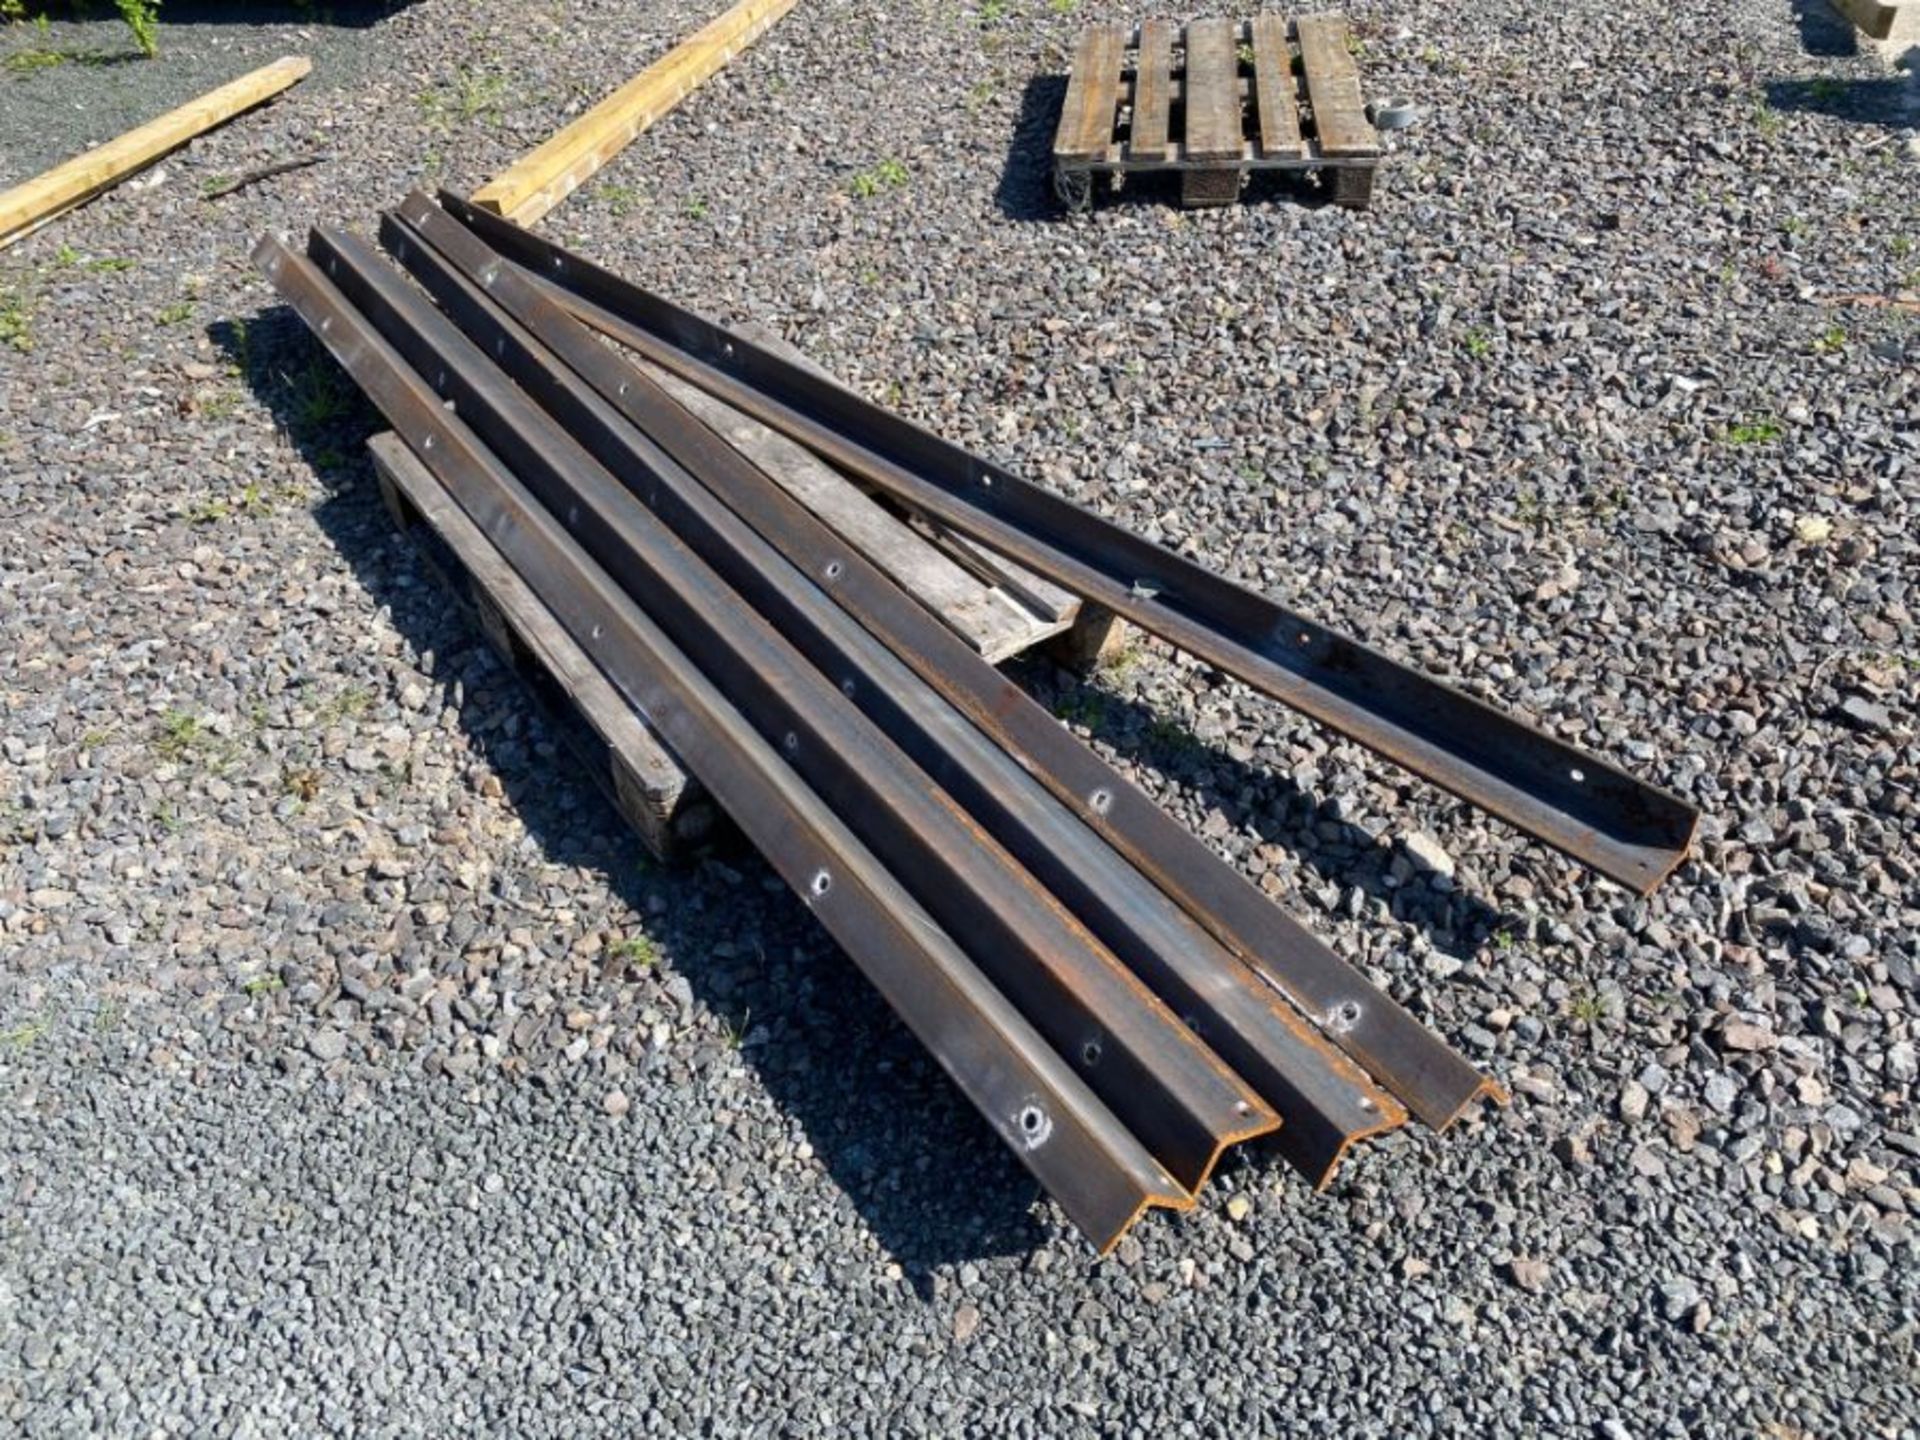 5 X LENGTHS OF 4 X 3” ANGLE IRON 10MM THICK (LENGTHS 118” - 121”) (HAMMER VAT ON THIS ITEM)